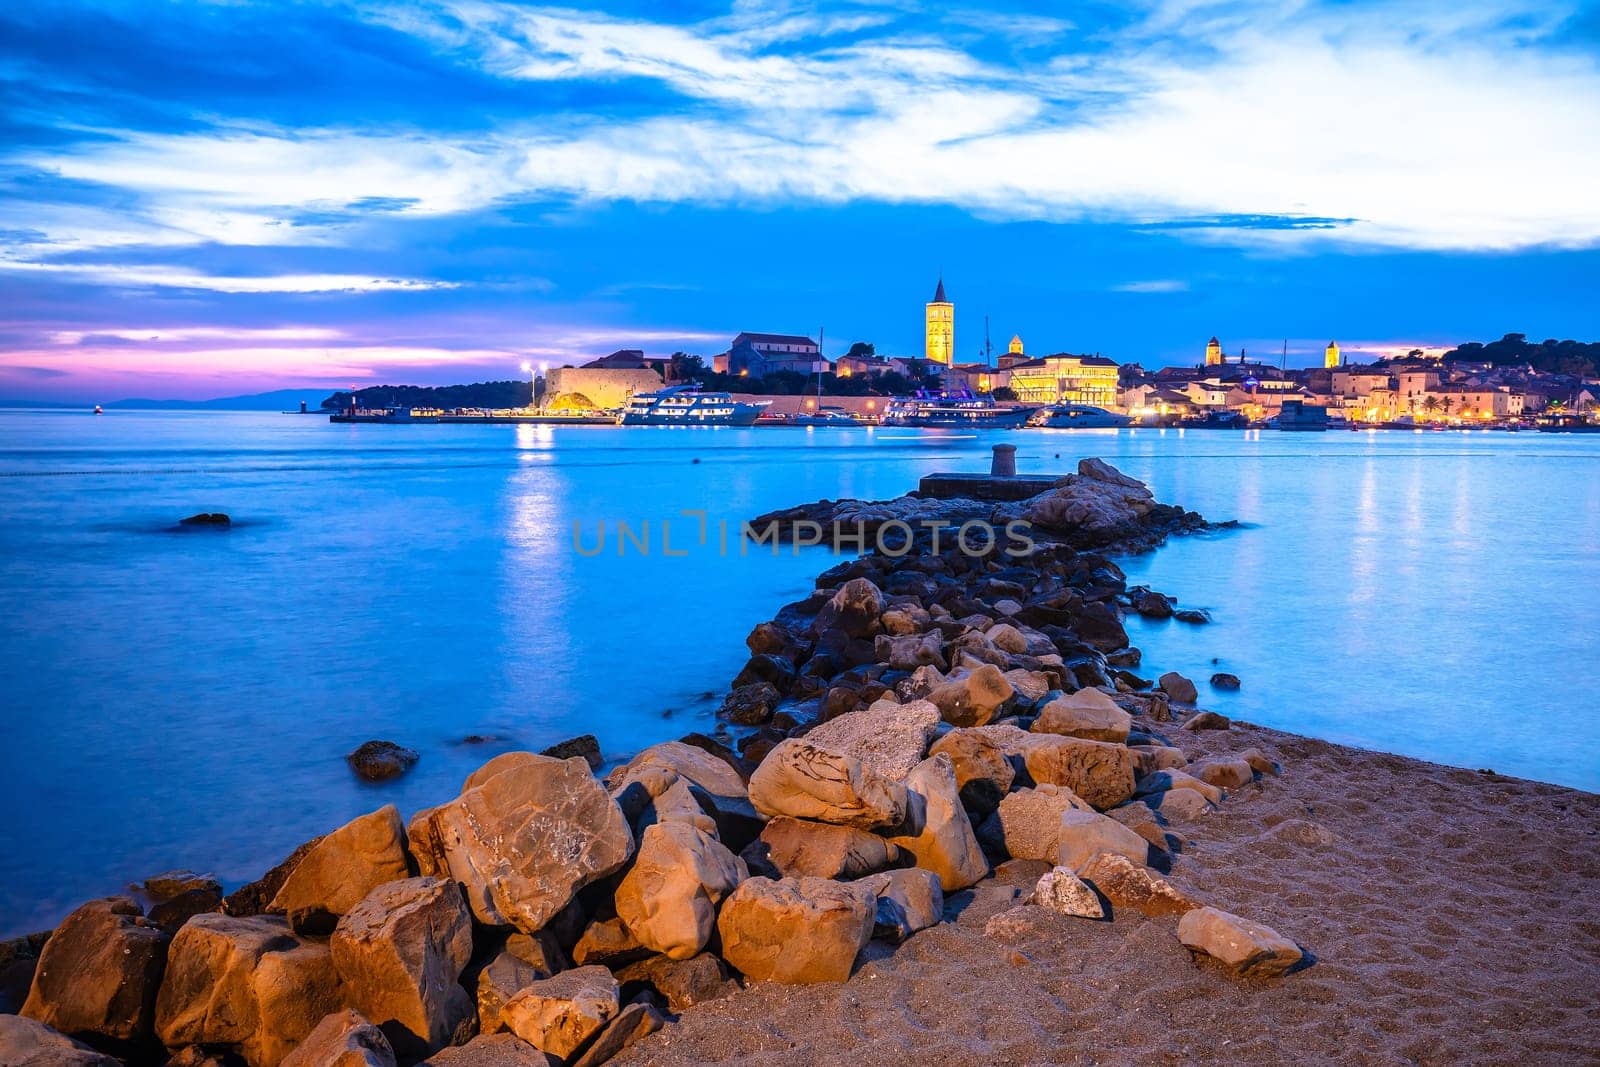 Historic town of Rab beach and architecture evening view, Island of Rab, Adriatic archipelago of Croatia